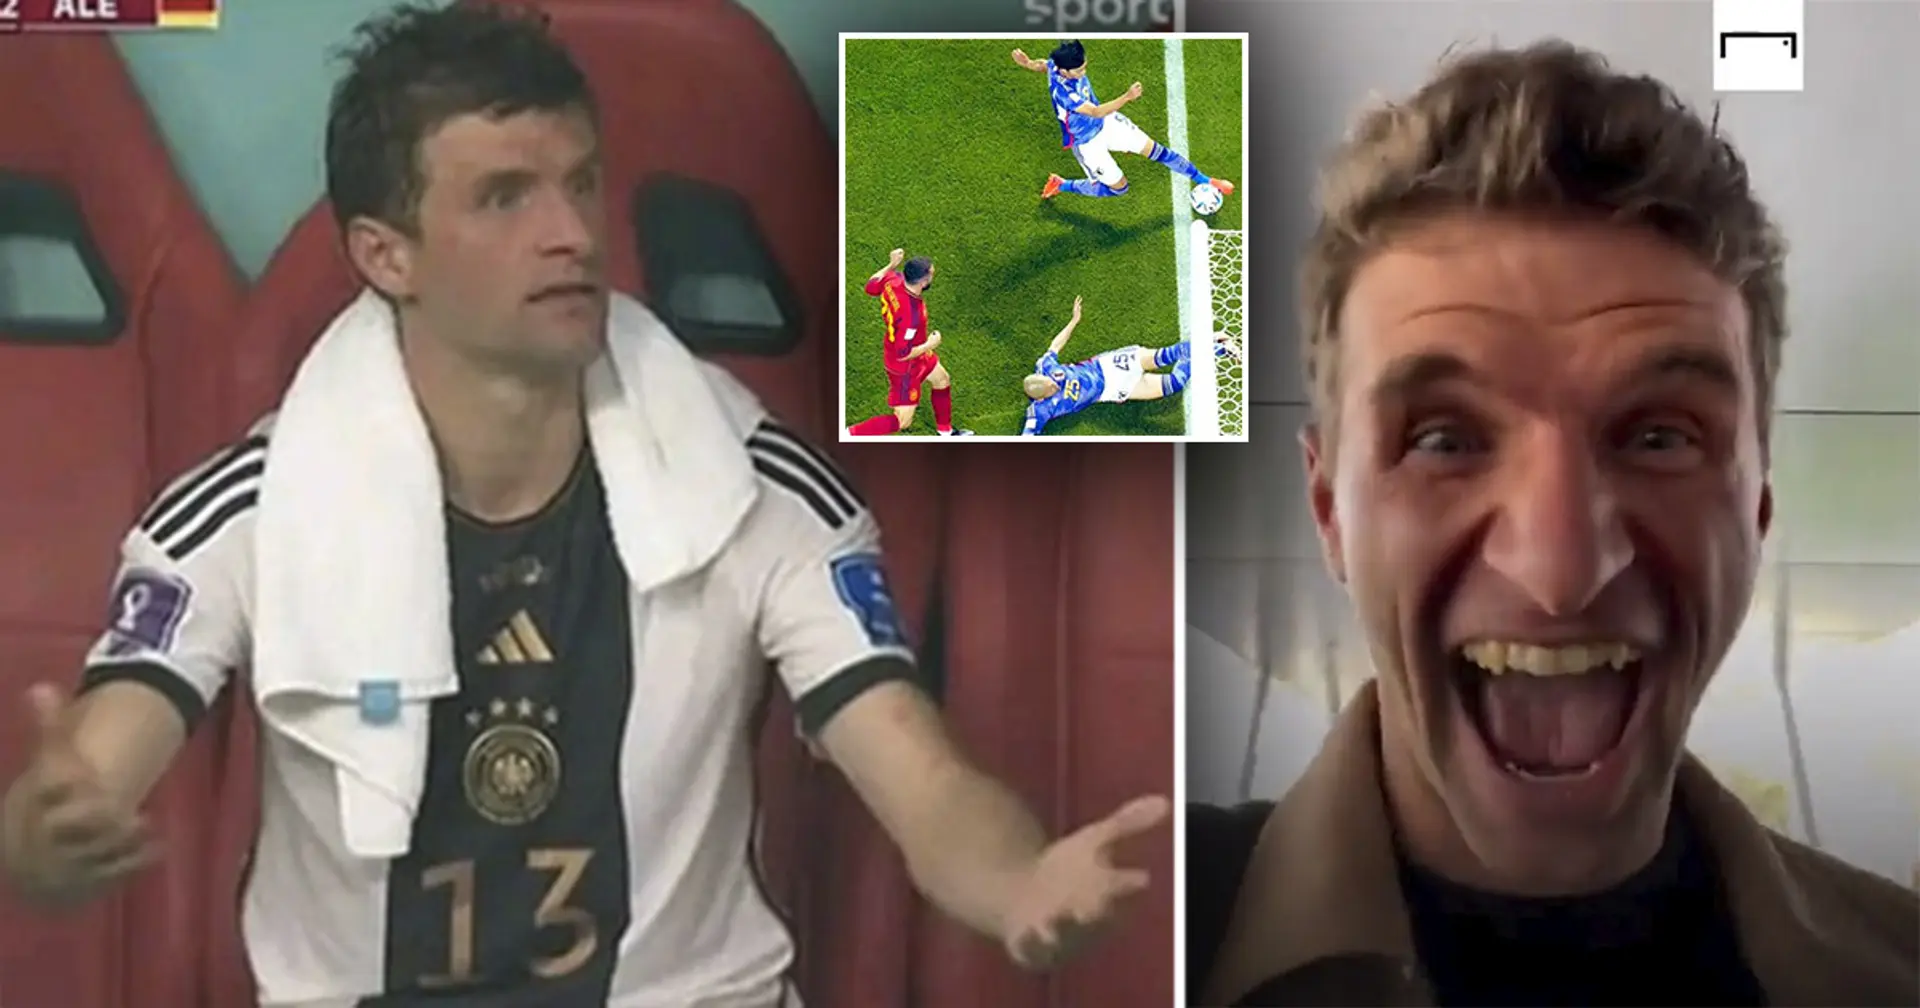 'Barca will pay for it': Muller quote after Germany's World Cup knockout goes viral – is it real? Answered